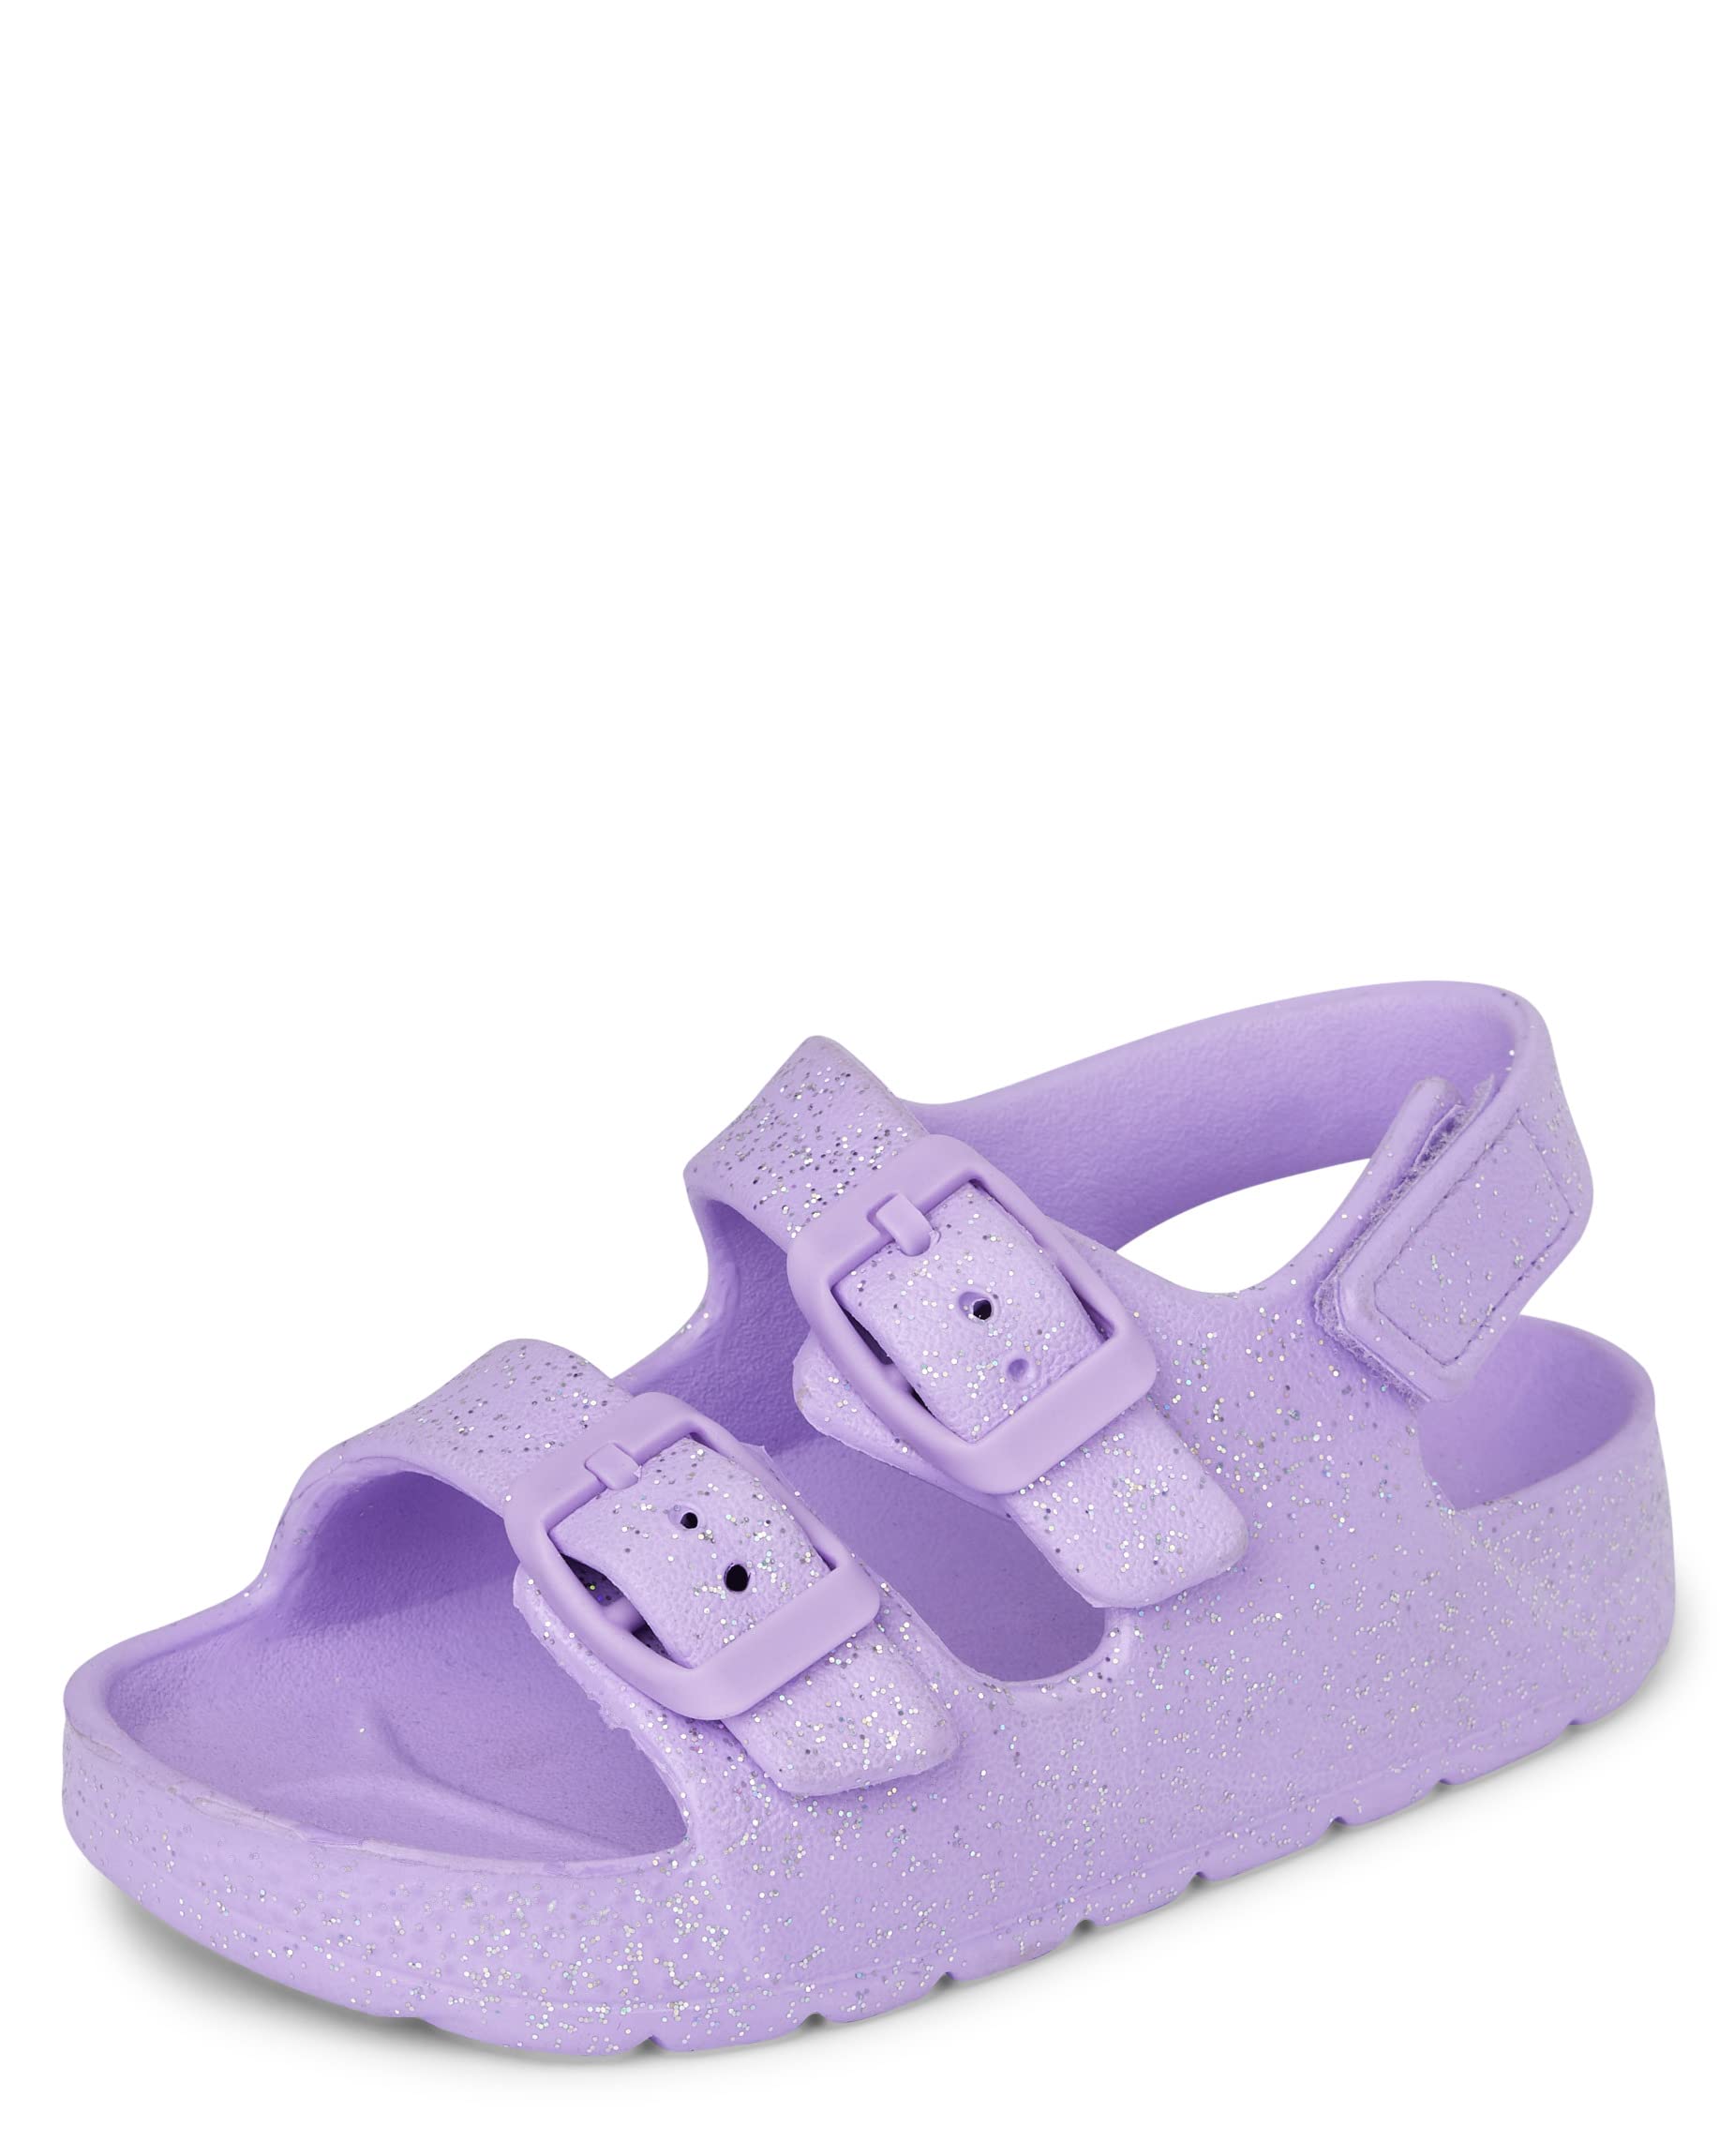 The Children's Place Toddler Girls Buckle Slides with Backstrap Sandal, Purple, 6